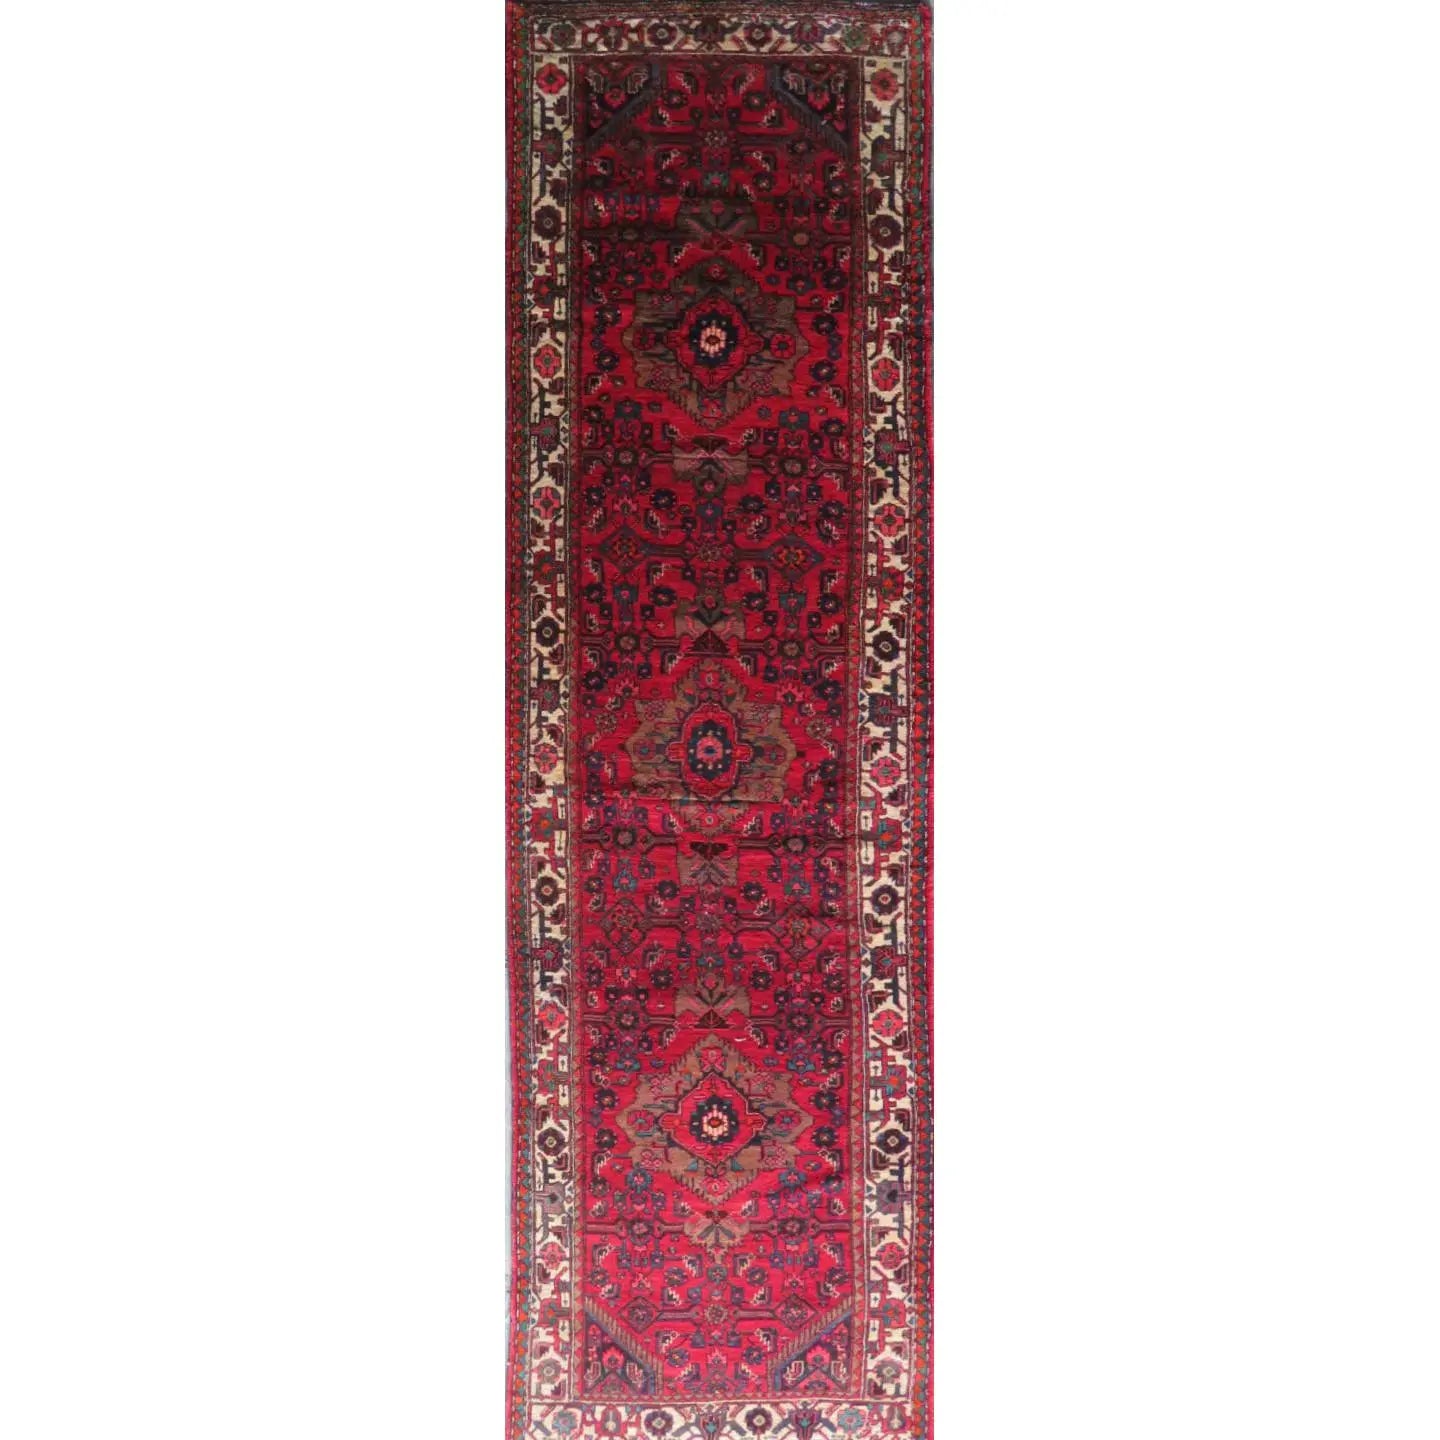 Hand-Knotted Persian Wool Rug _ Luxurious Vintage Design, 13'8" x 3'6", Artisan Crafted